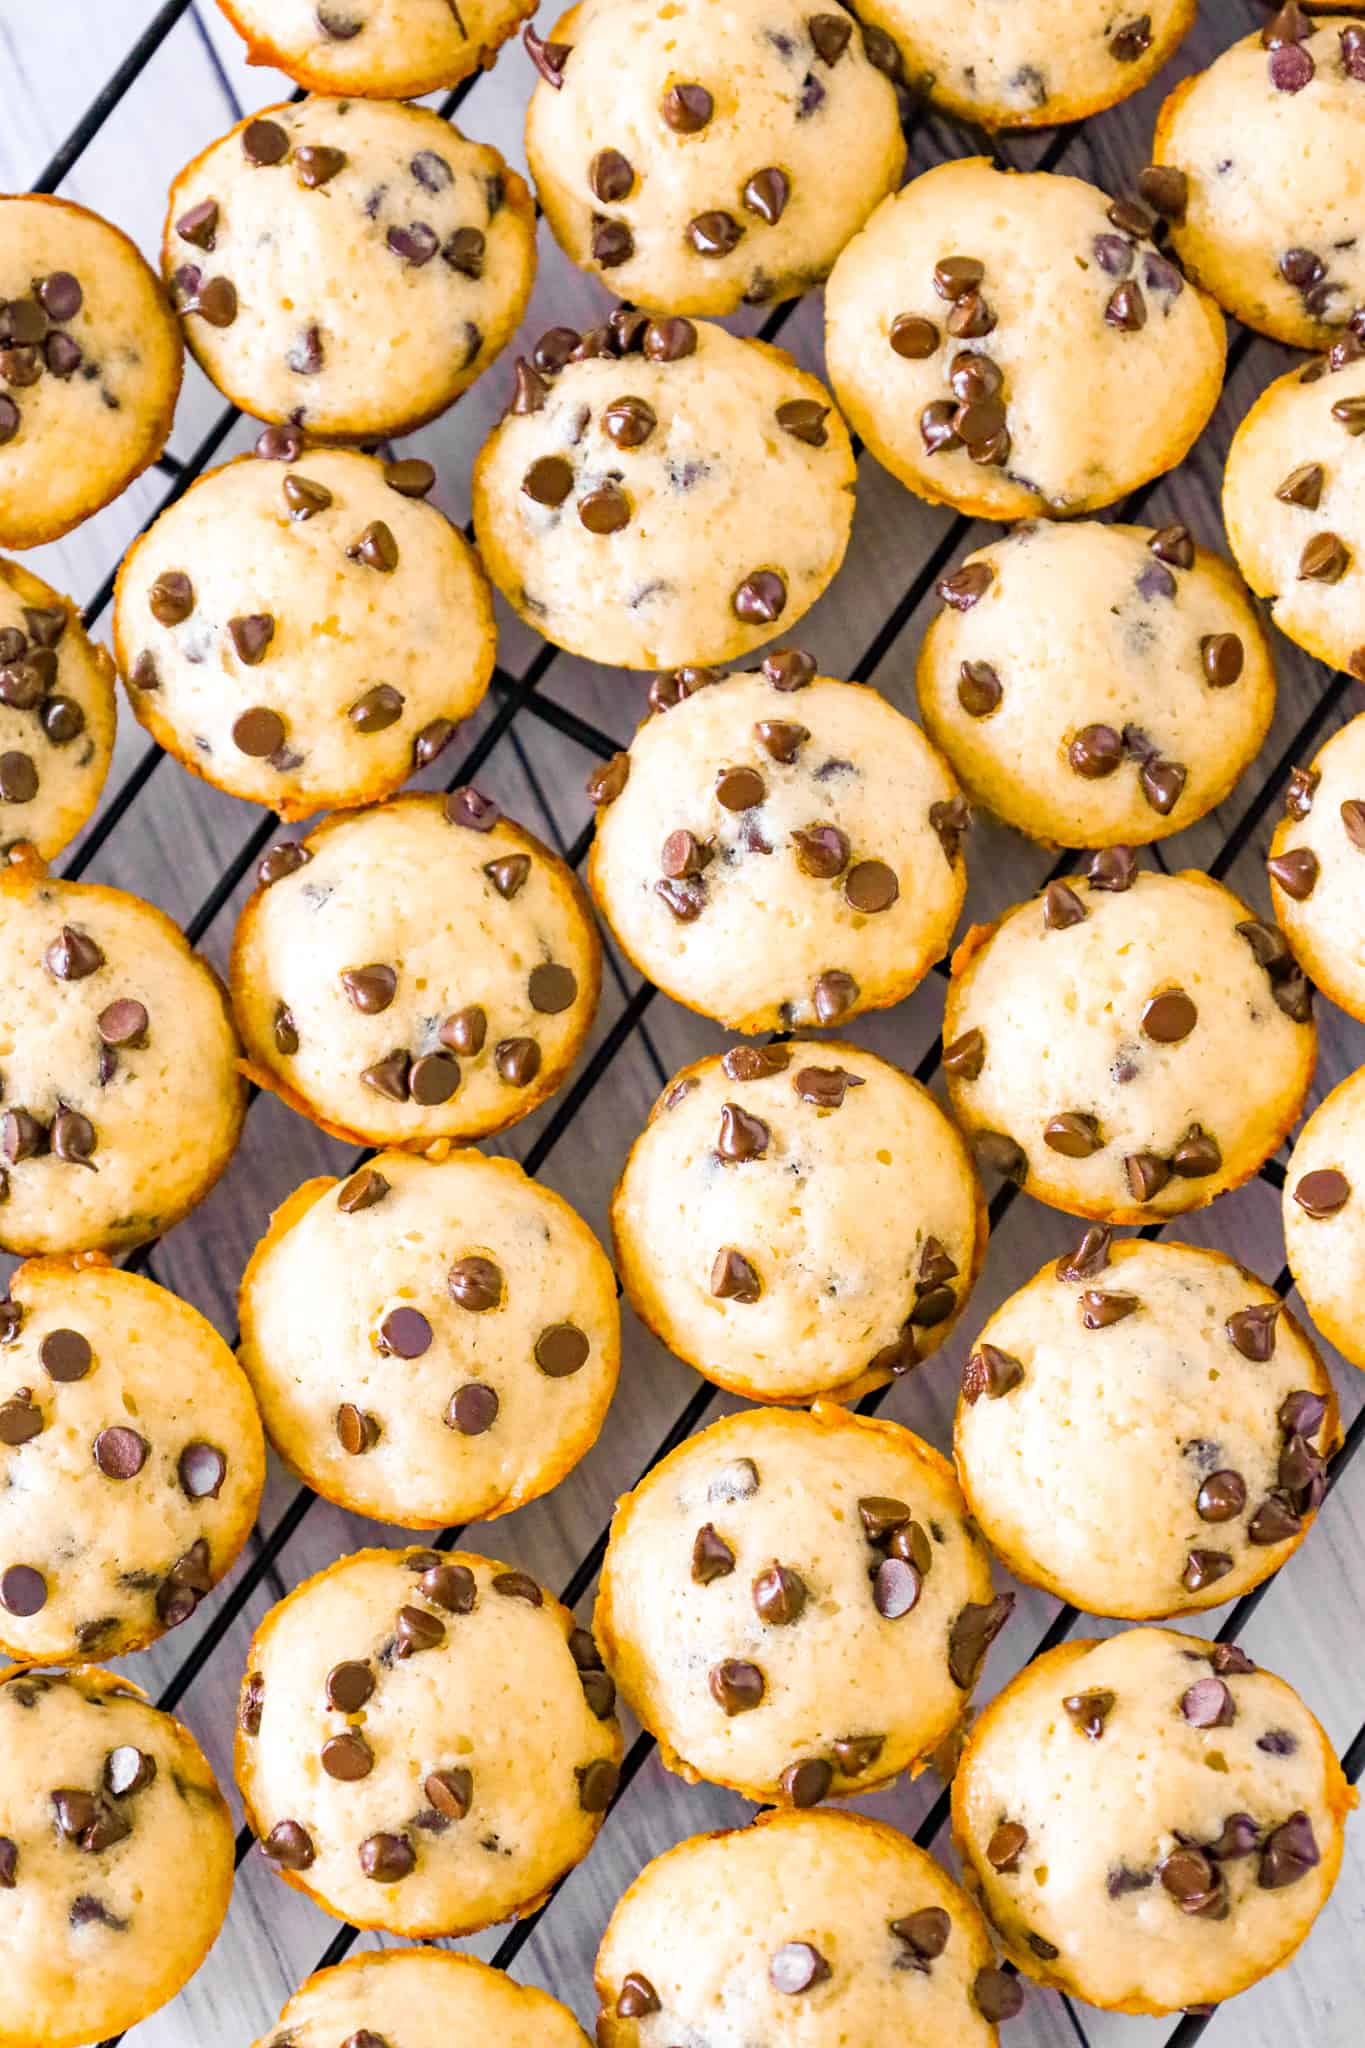 Mini Chocolate Chip Muffins are a tasty bite sized snack recipe that is sure to please both kids and adults.